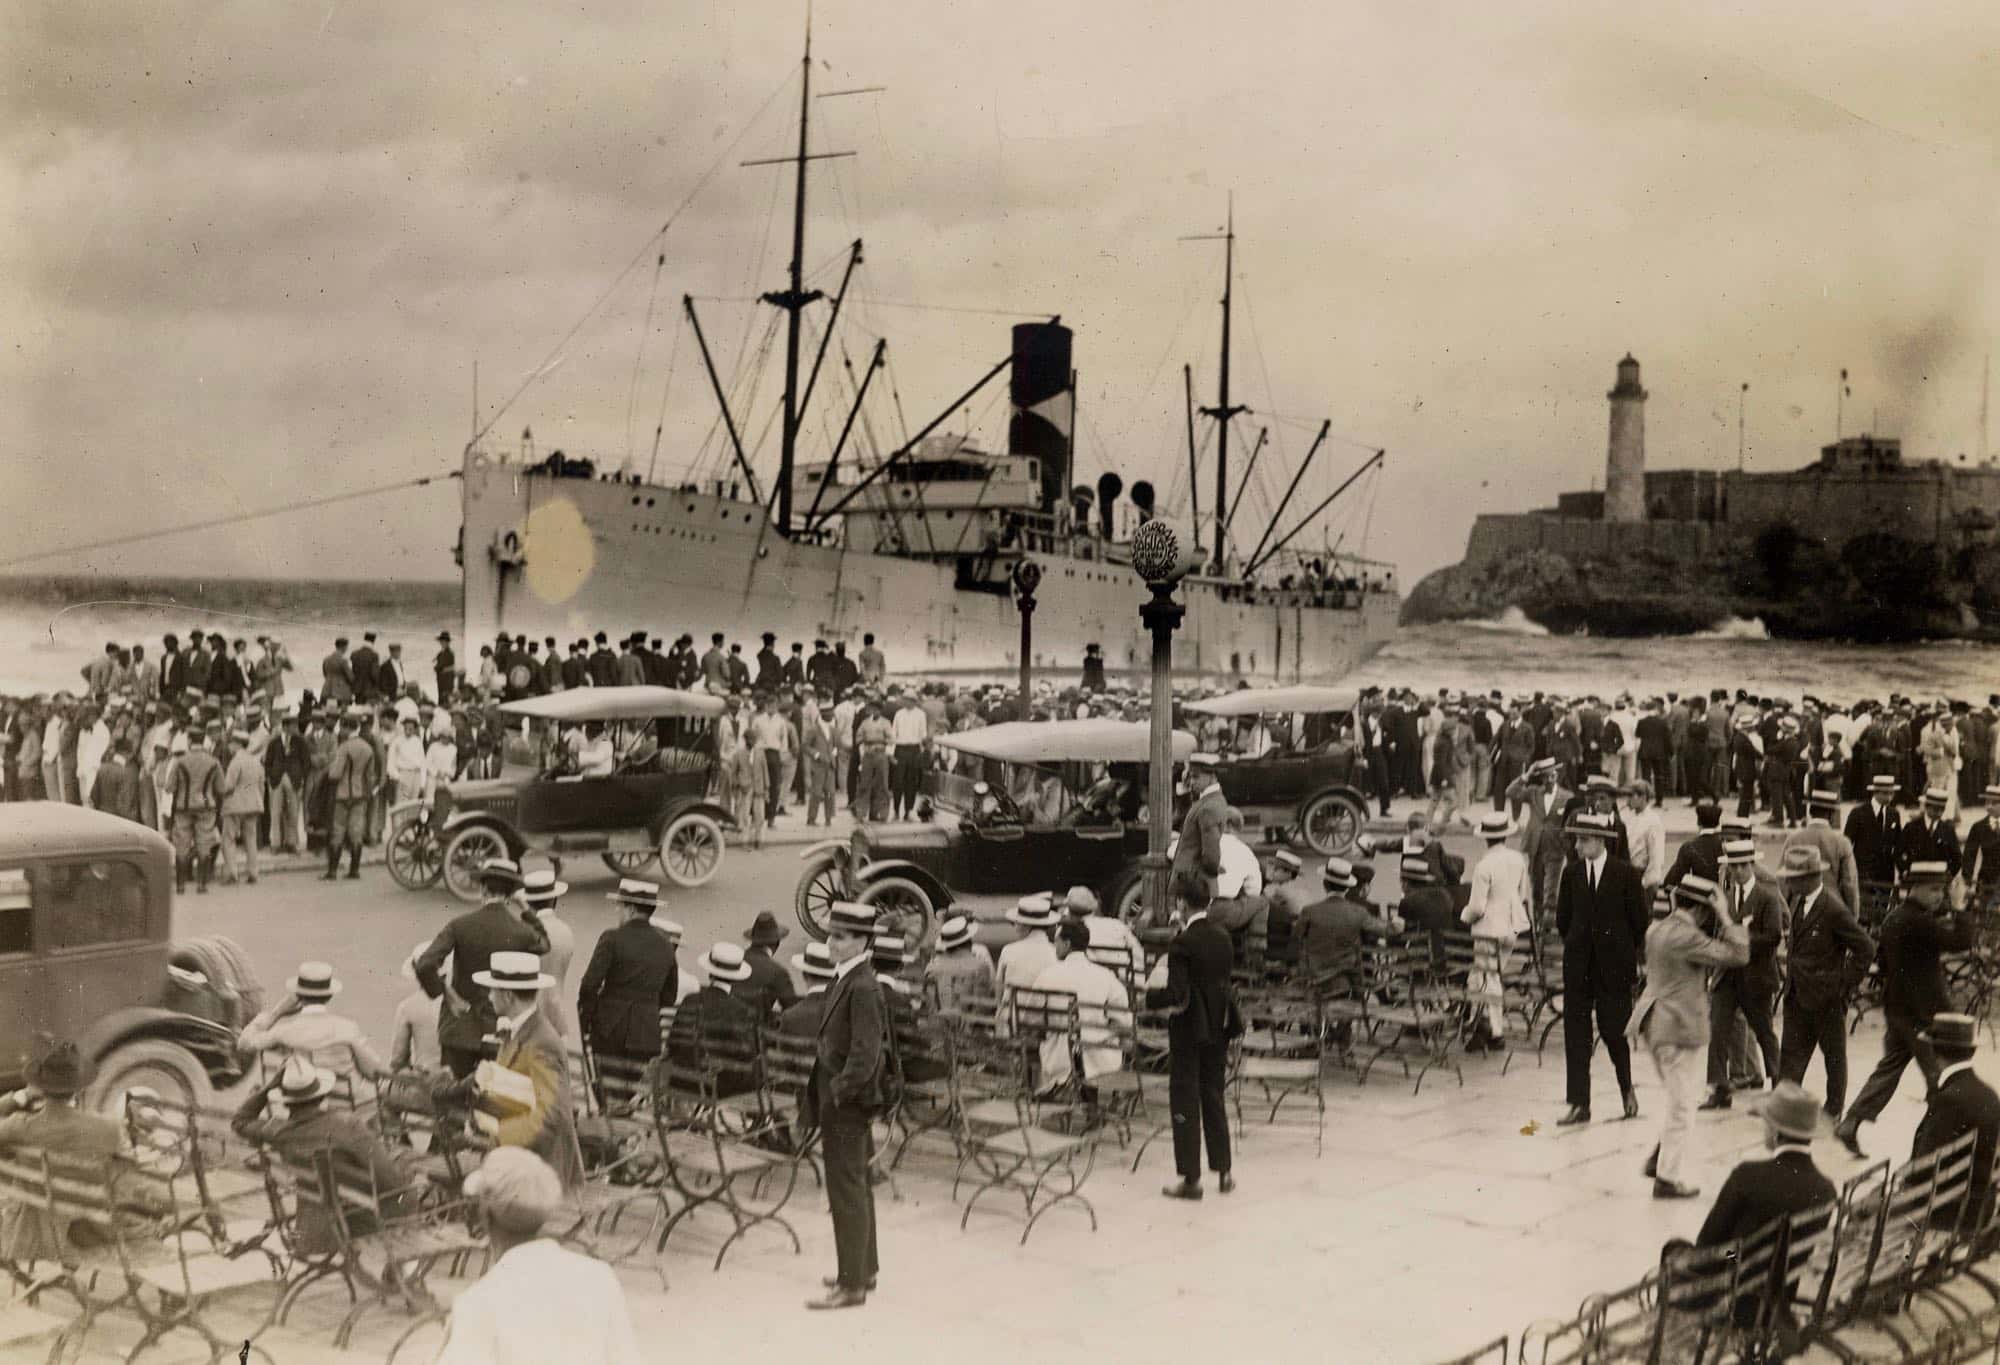 San Pablo fruit import ship being watched by a crowd of people sometime during the early 1900s.